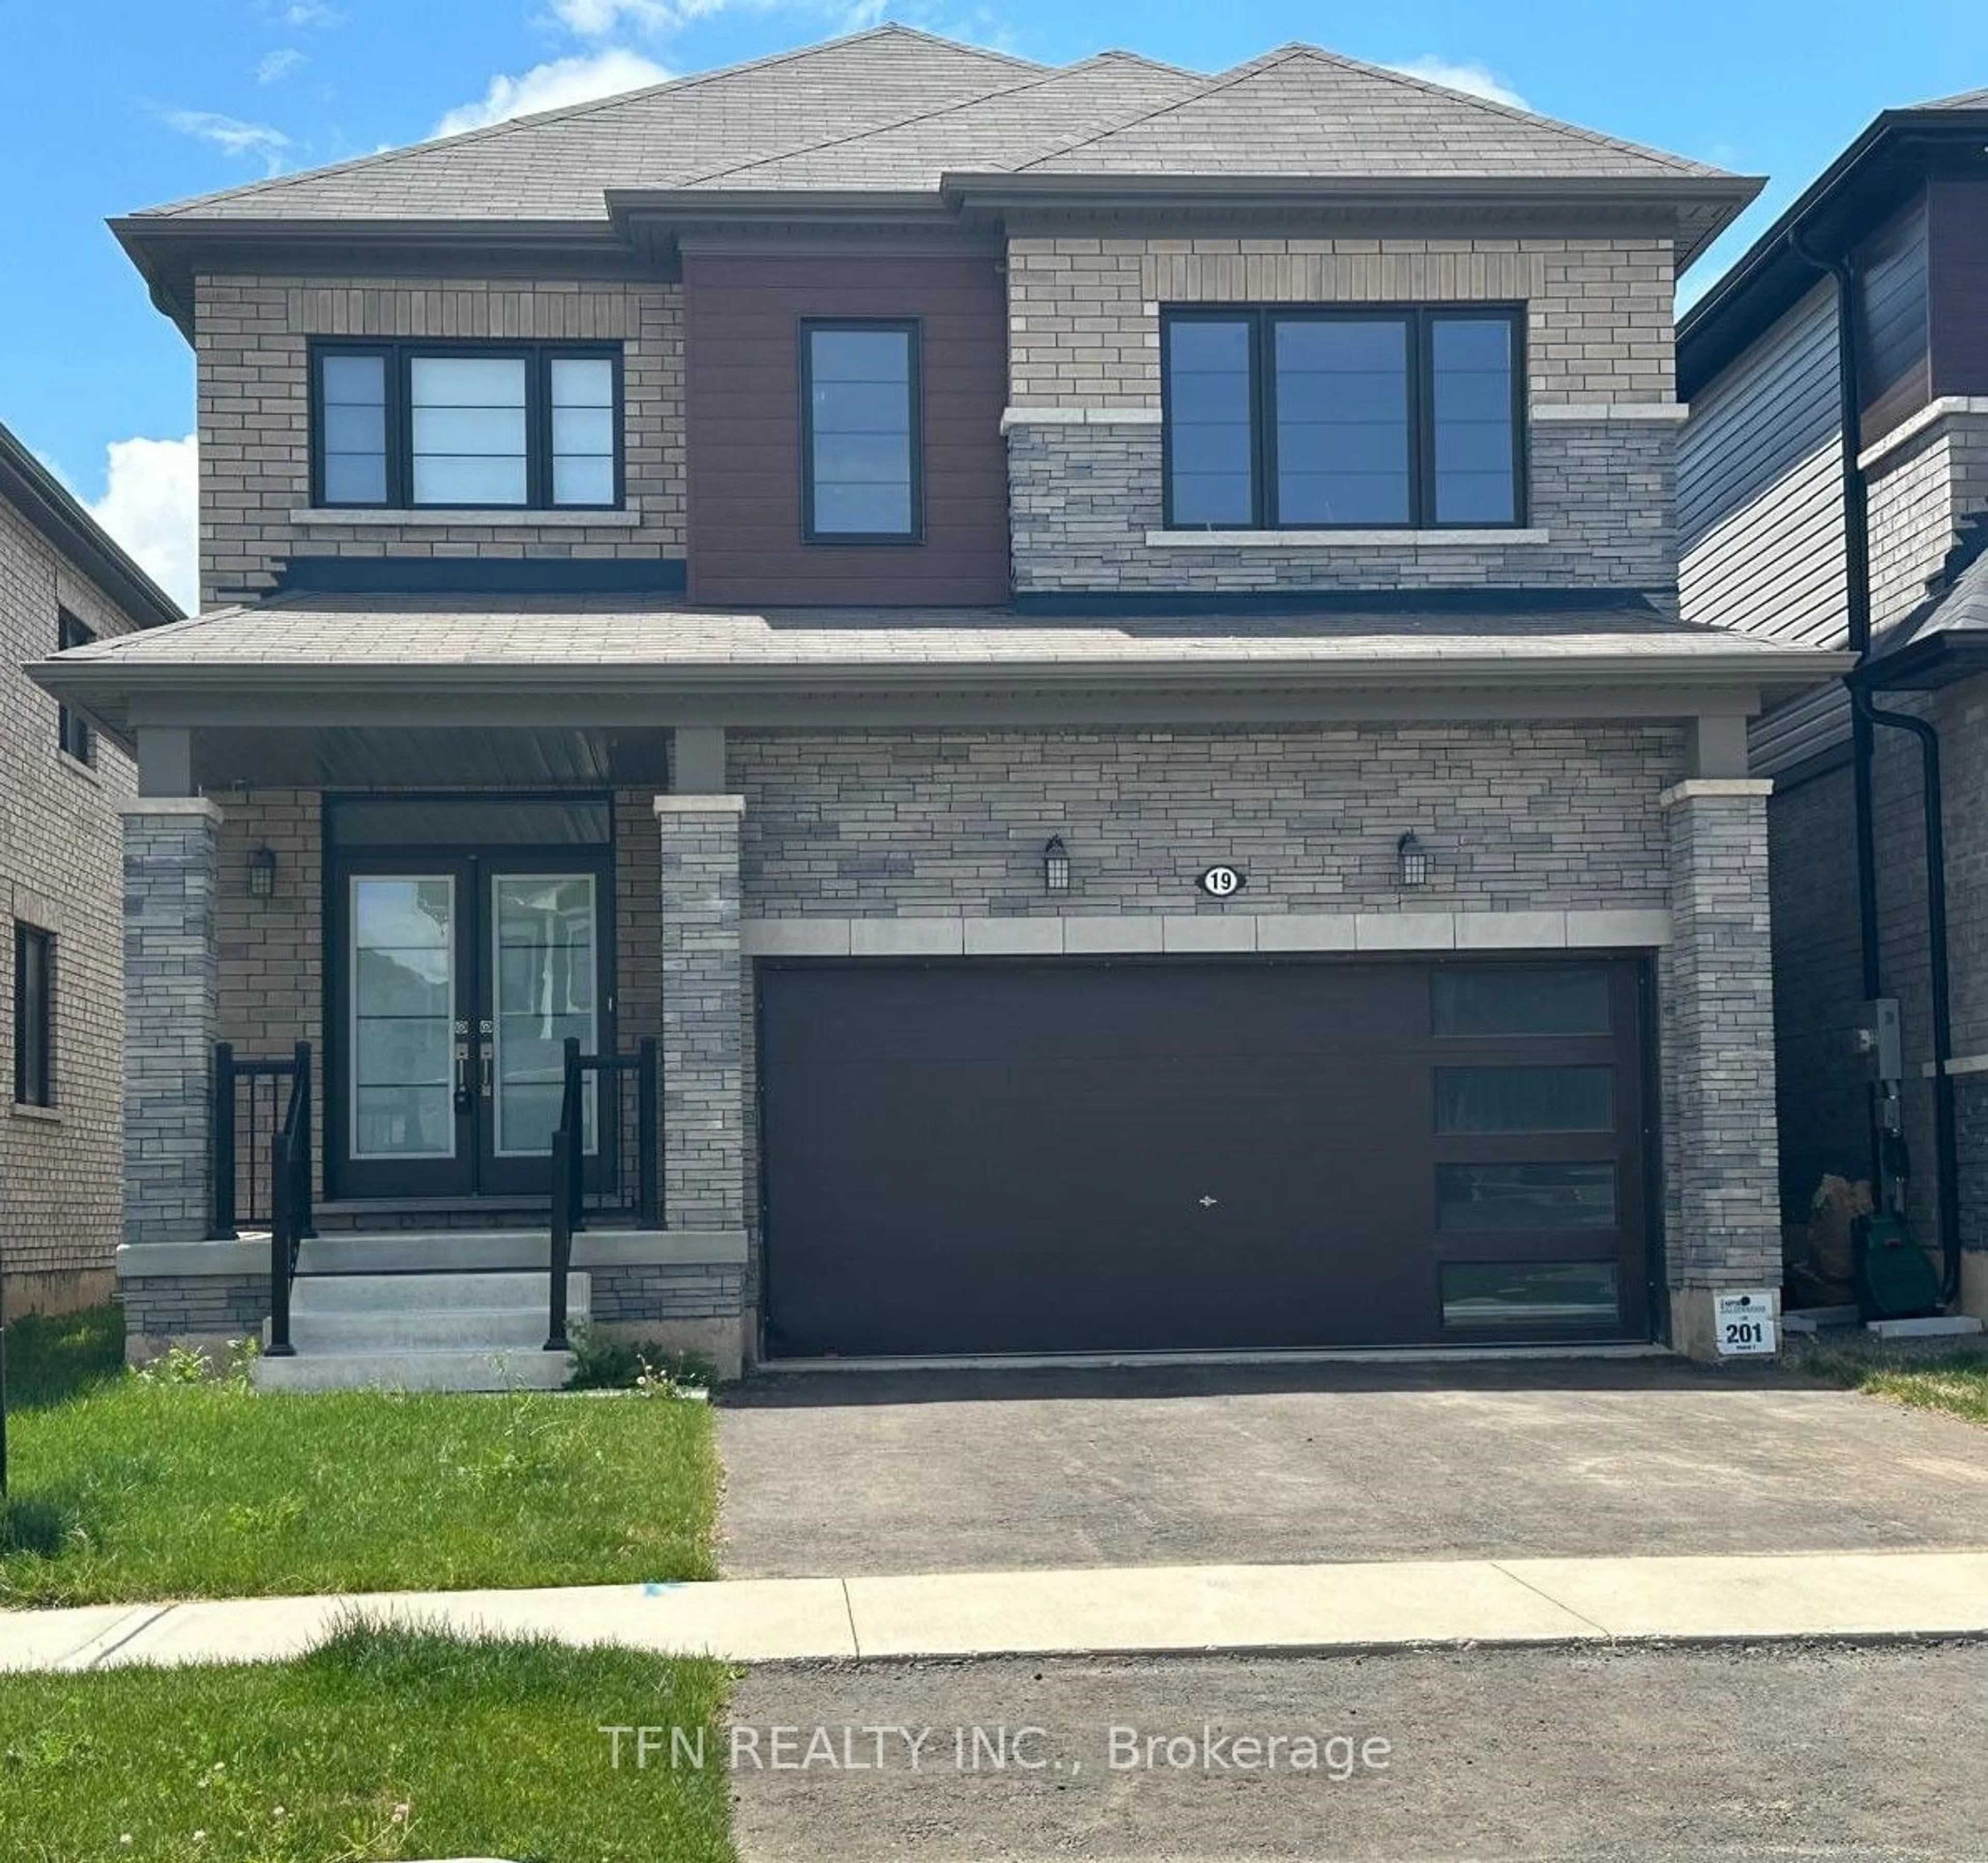 Home with brick exterior material for 19 Buttercream Ave, Thorold Ontario L2V 0L3